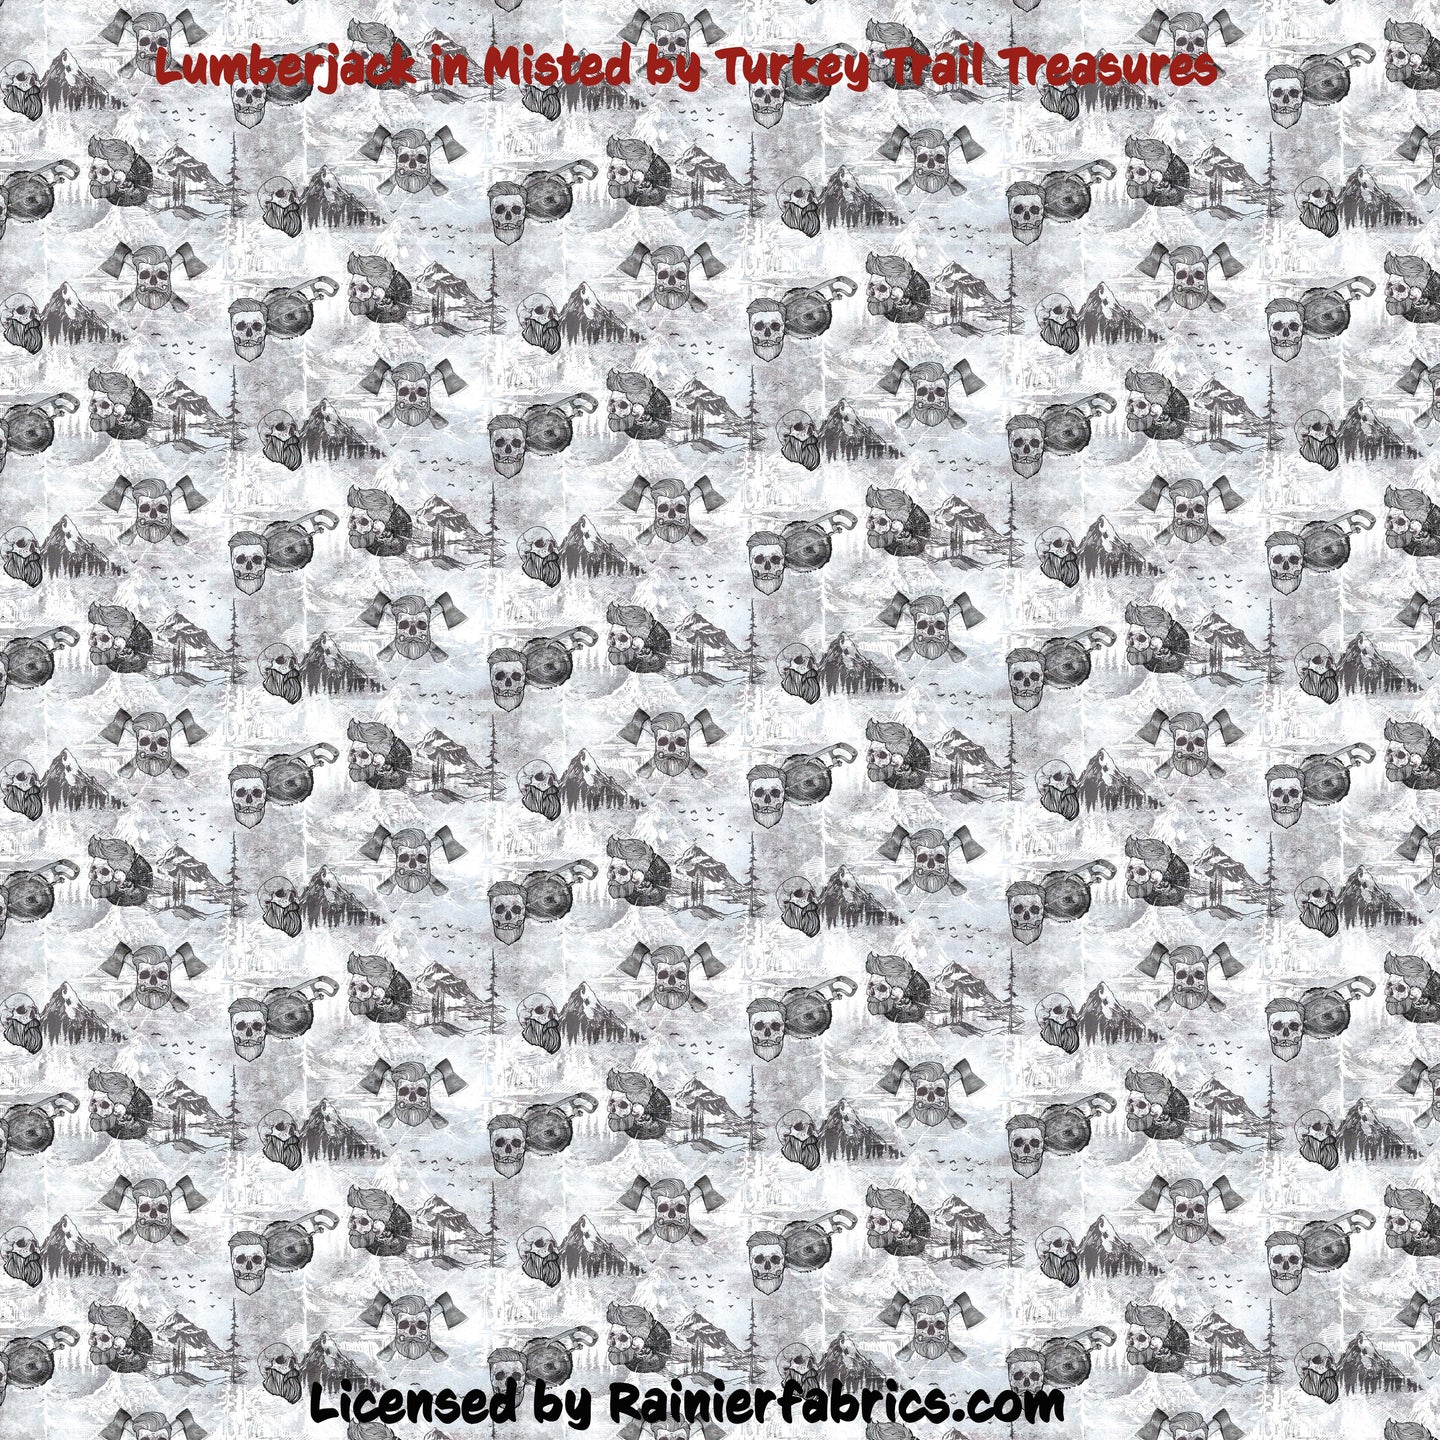 Lumberjacks by Turkey Trail Treasures in Scarlett and Misted - 2-5 day turnaround - Order by 1/2 yard; Description of bases below